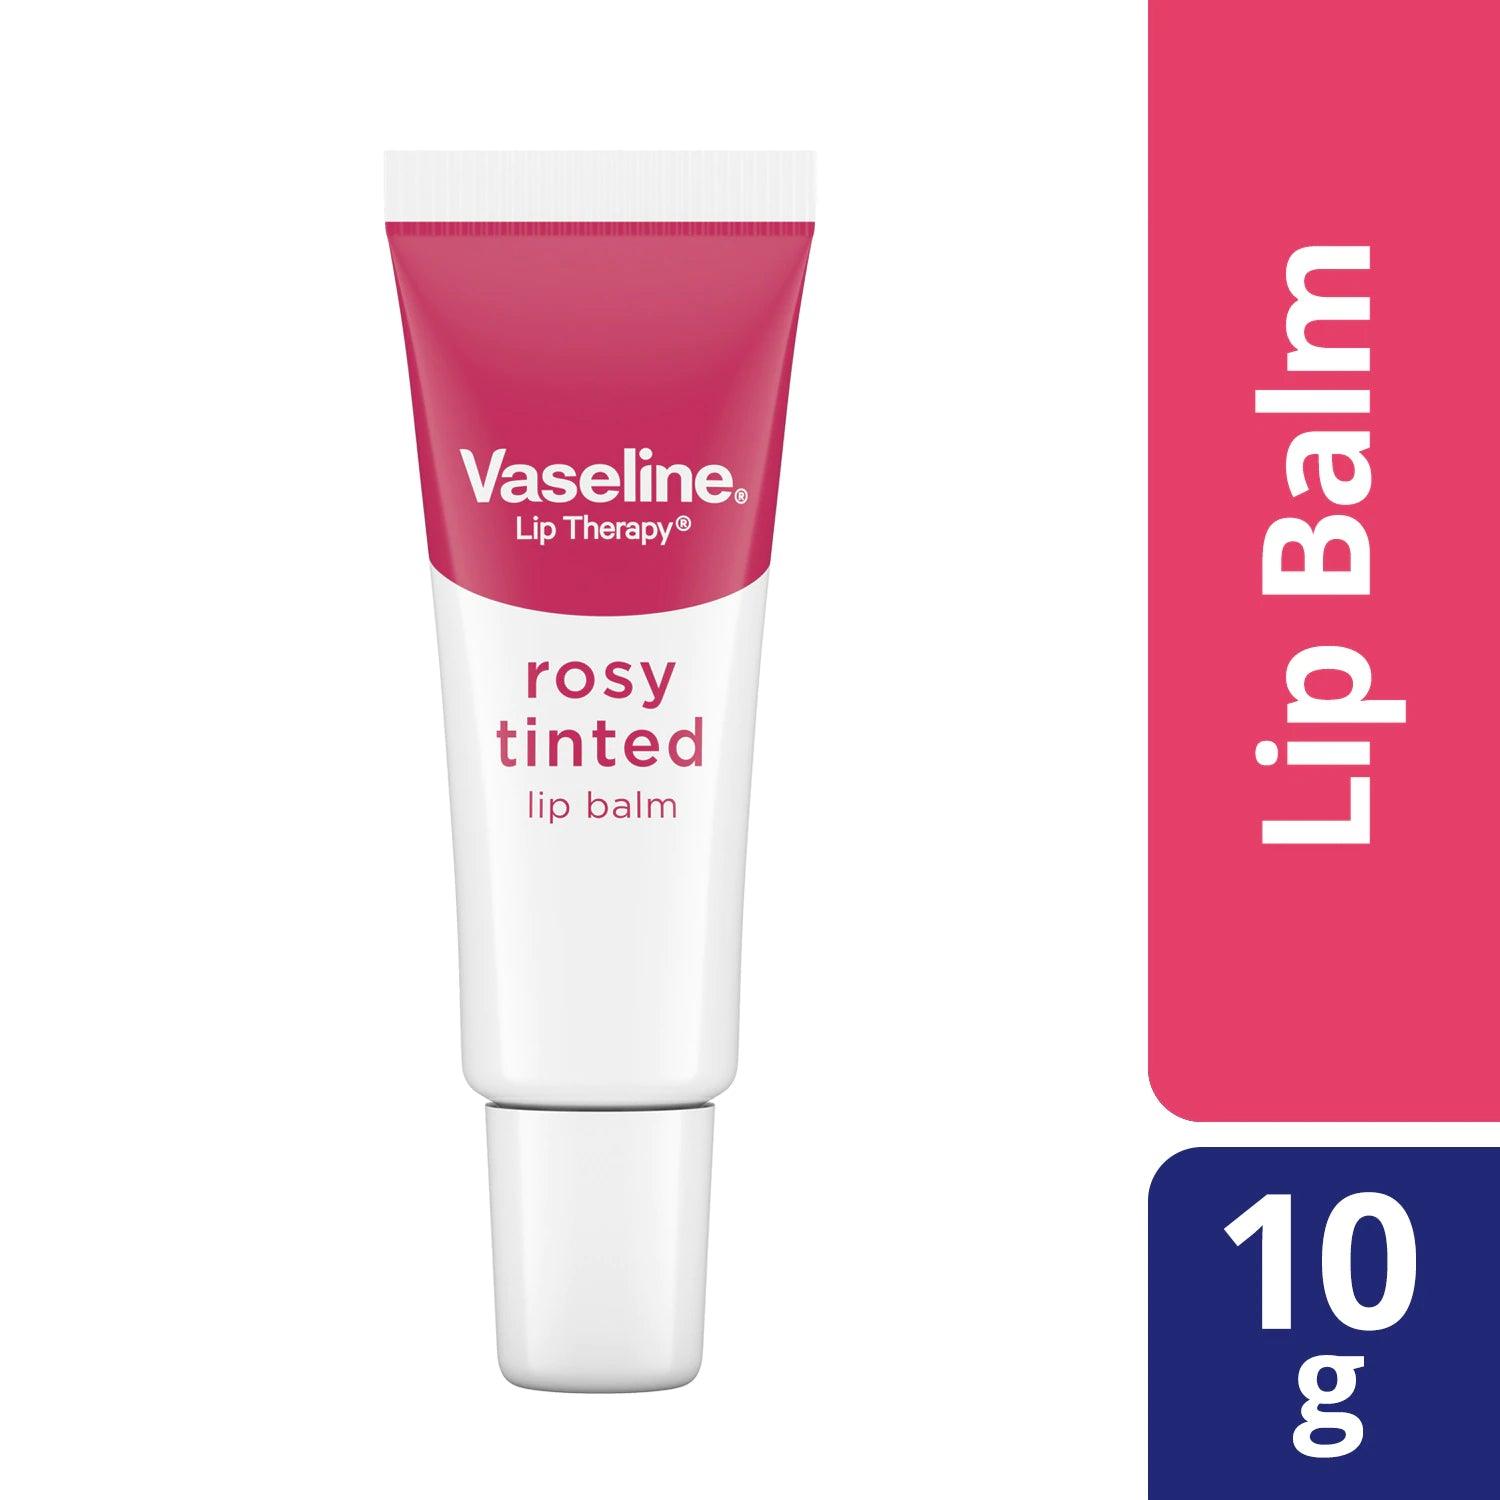 Vaseline Lip Therapy Rosy Tinted Lip Balm 10G - Beauty Bounty